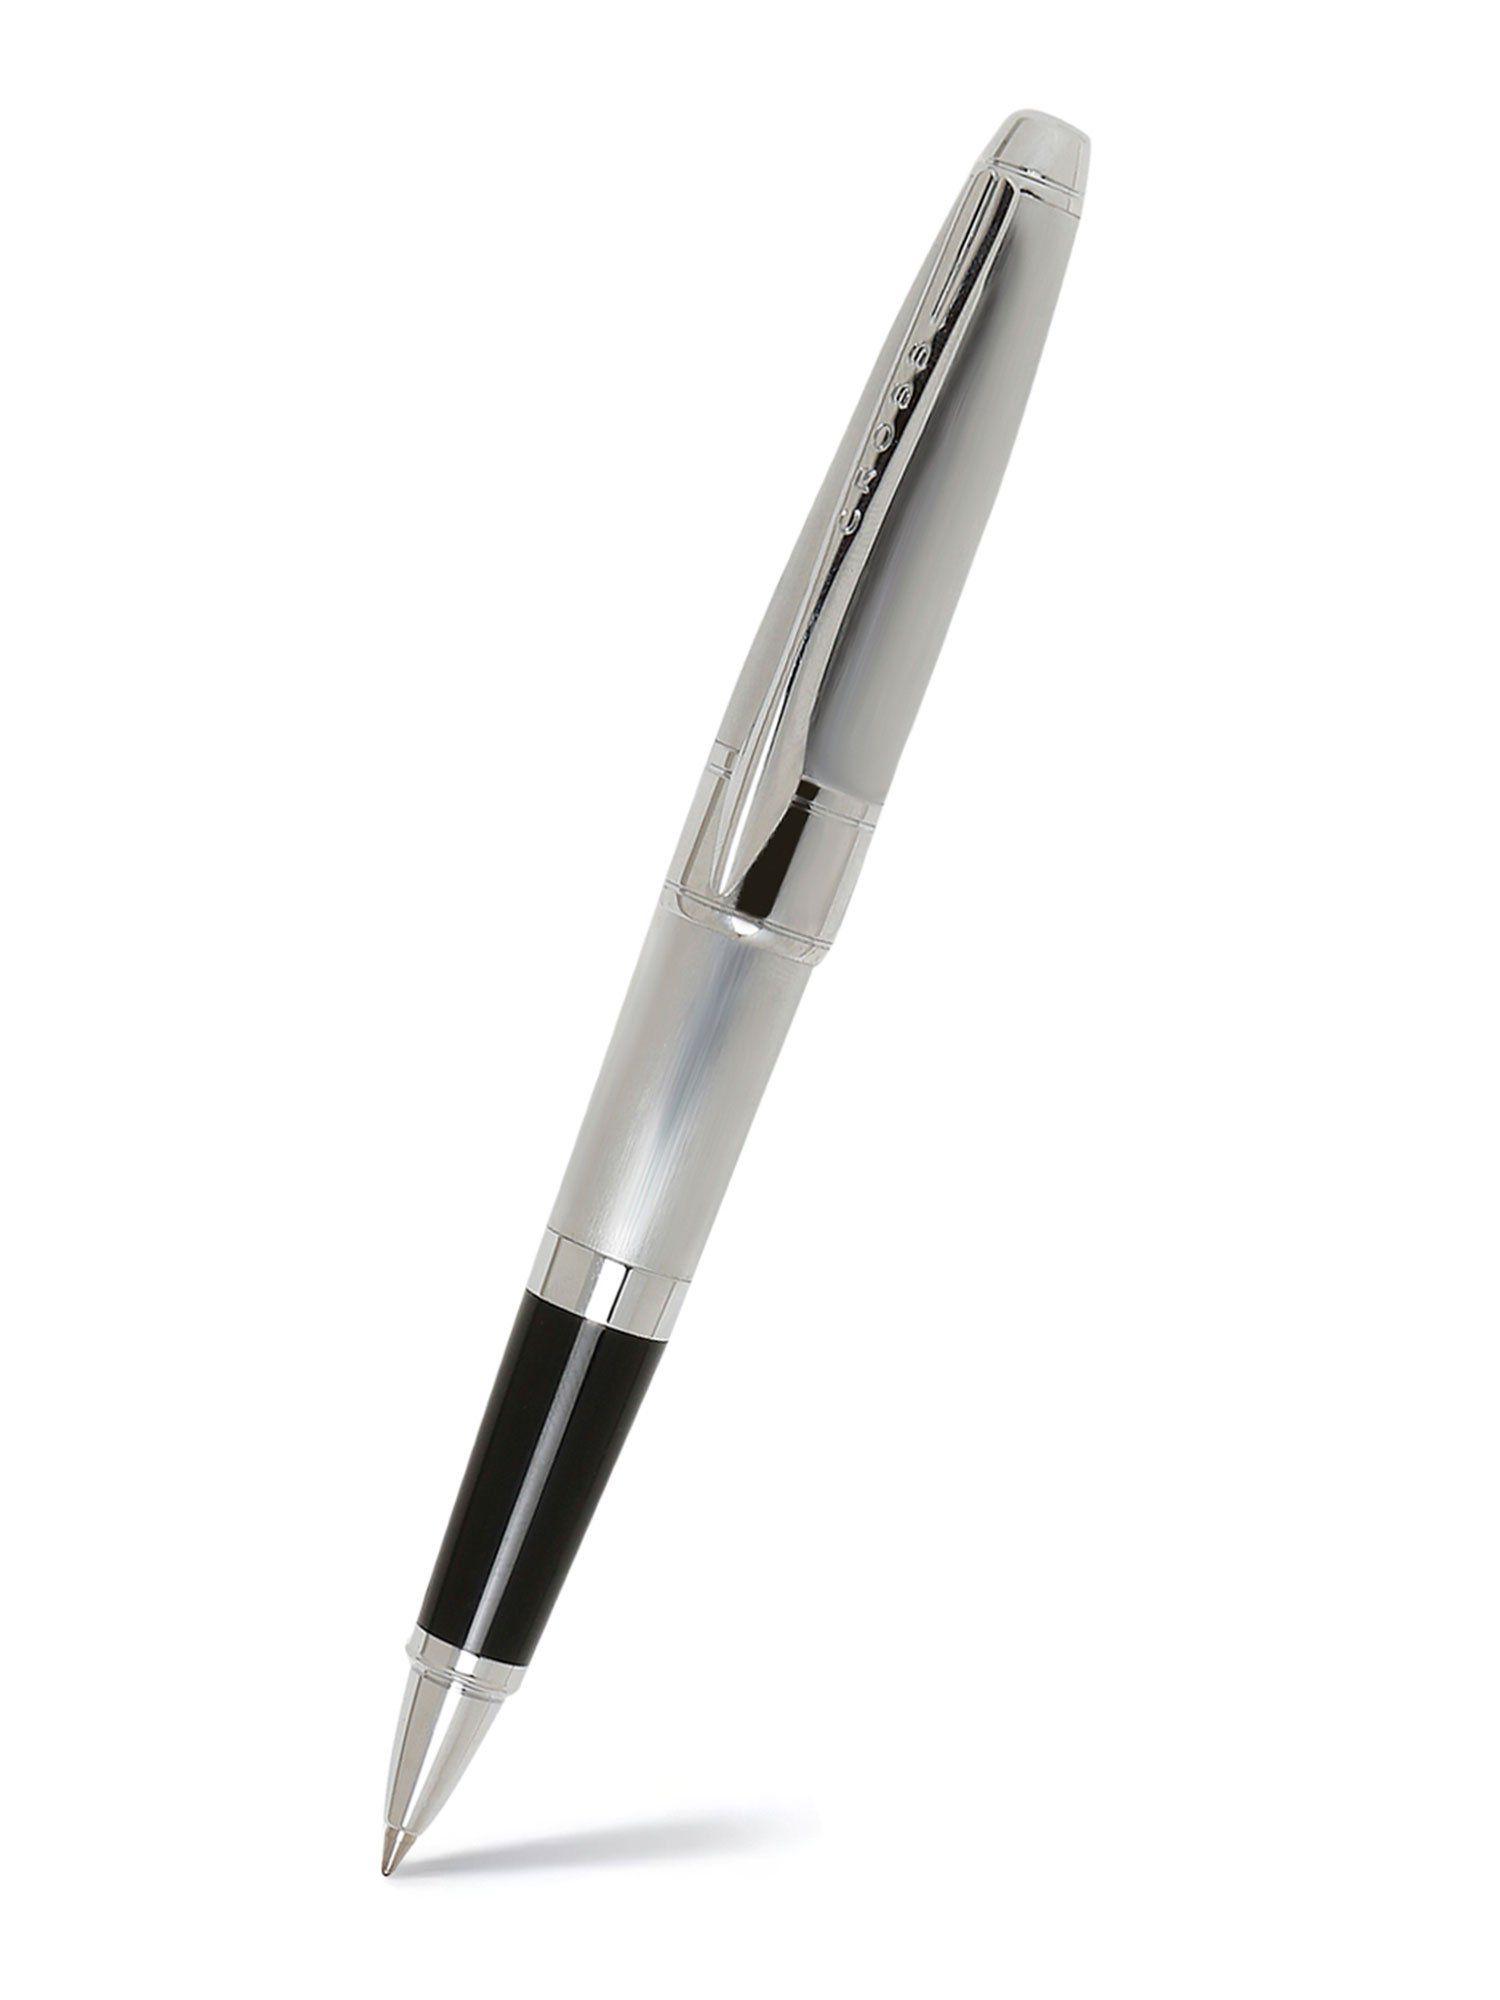 at0125-18 apogee brushed chrome rolling ball pen